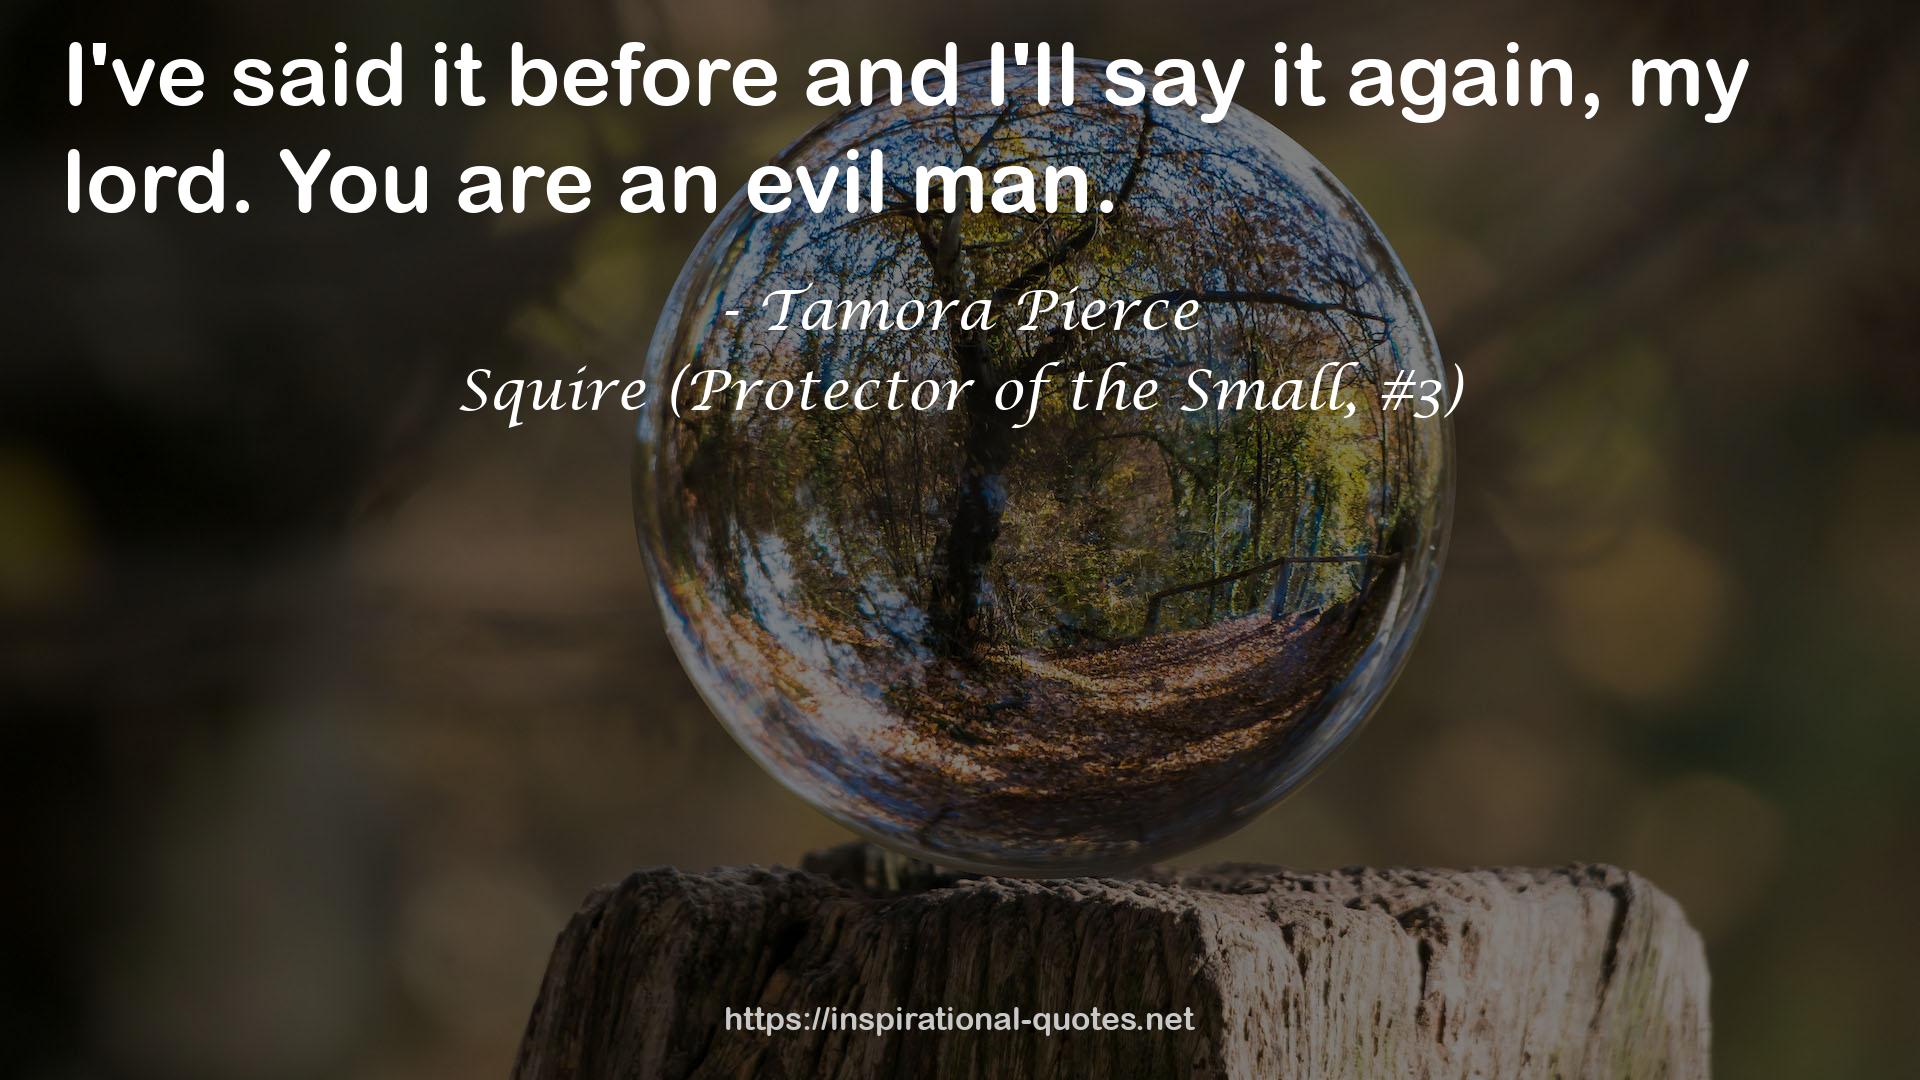 Squire (Protector of the Small, #3) QUOTES